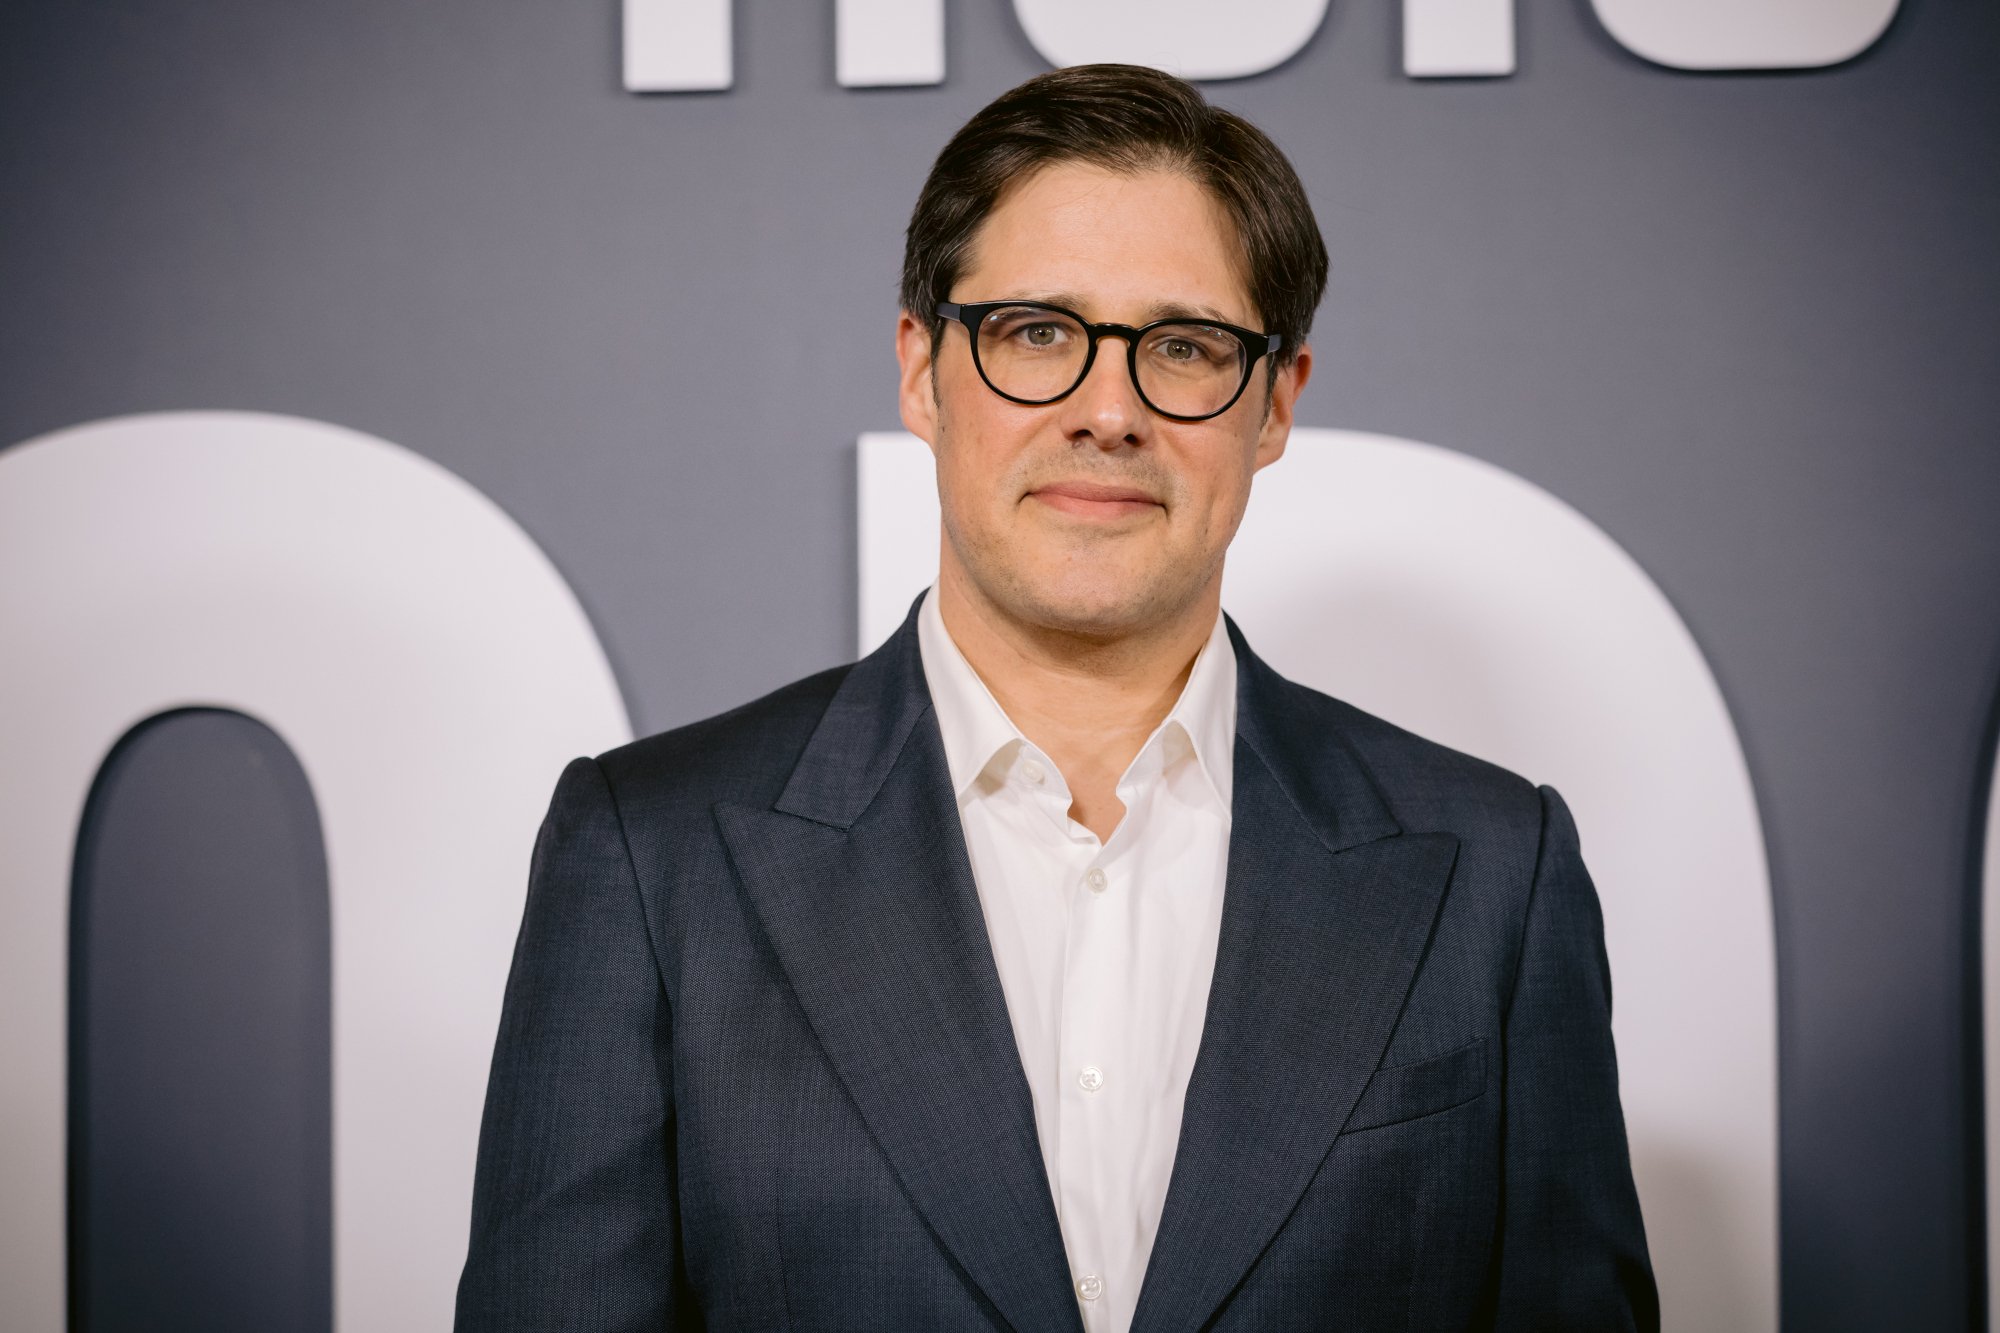 Rich Sommer at the premiere for 'The Dropout.' He's wearing a suit and looking at the camera.